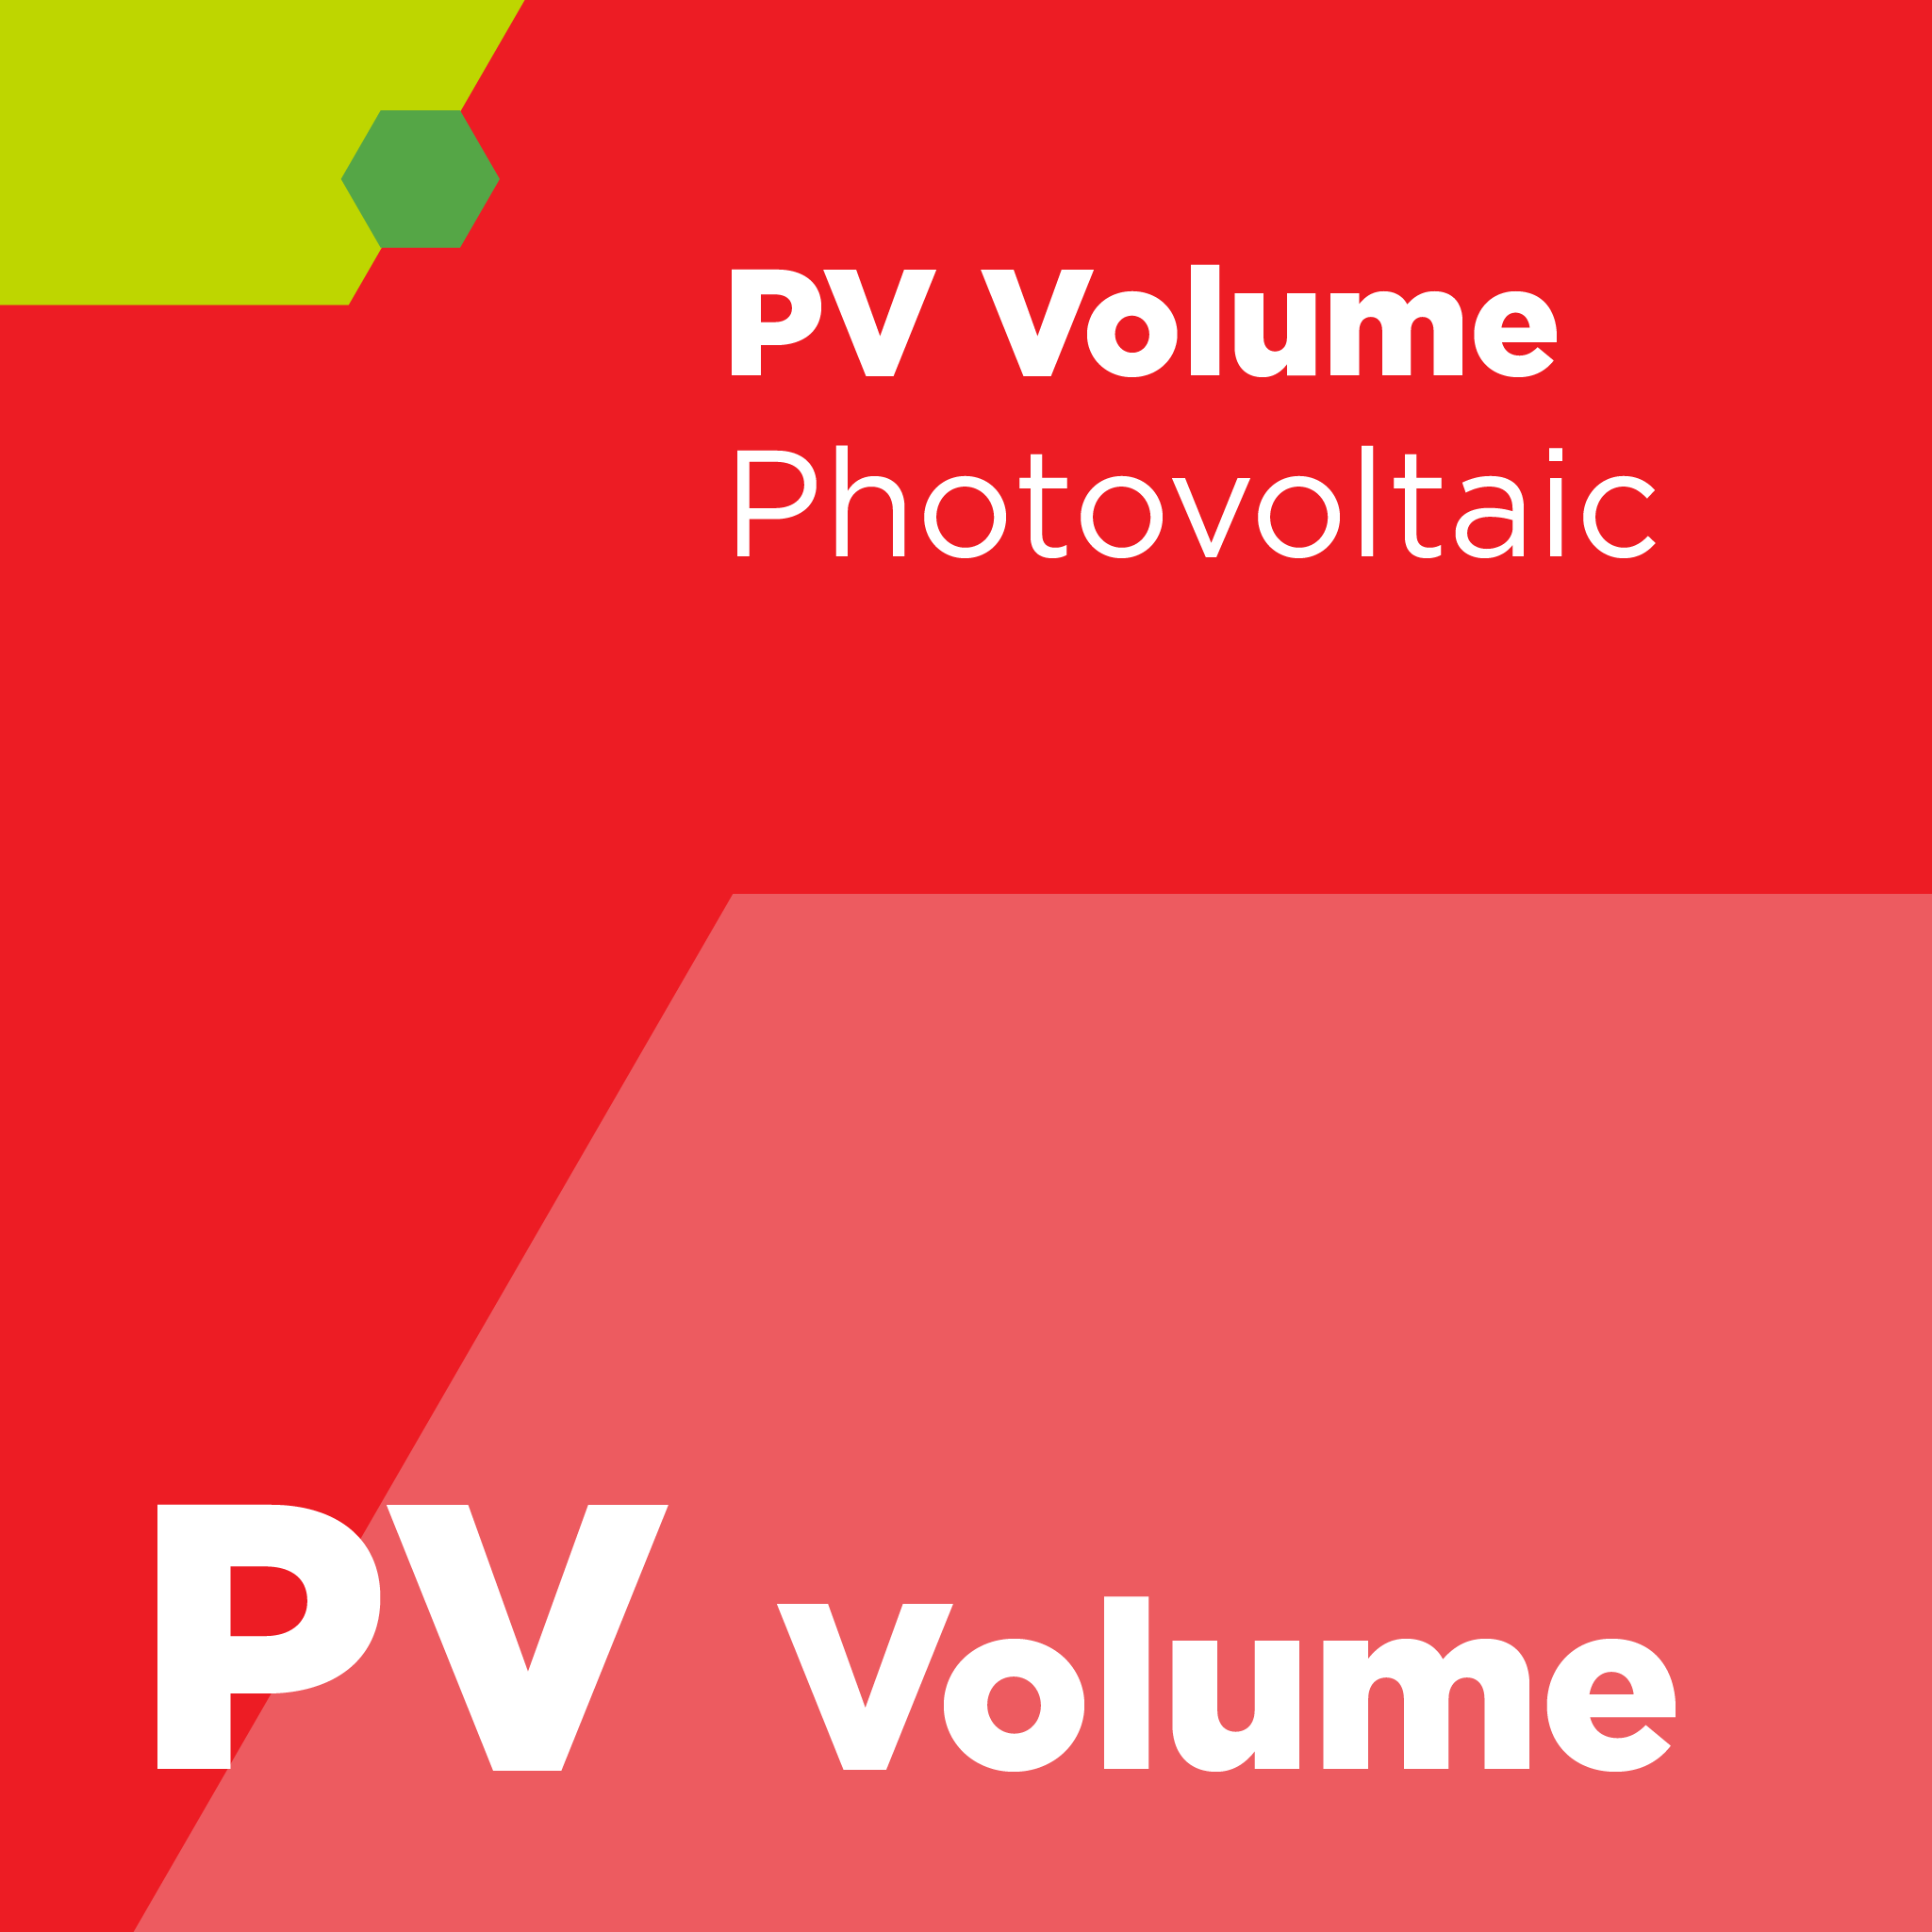 PV09800 - SEMI PV98 - Specification for Silicone Adhesive for the Back Rail Fixture on Photovoltaic (PV) Modules